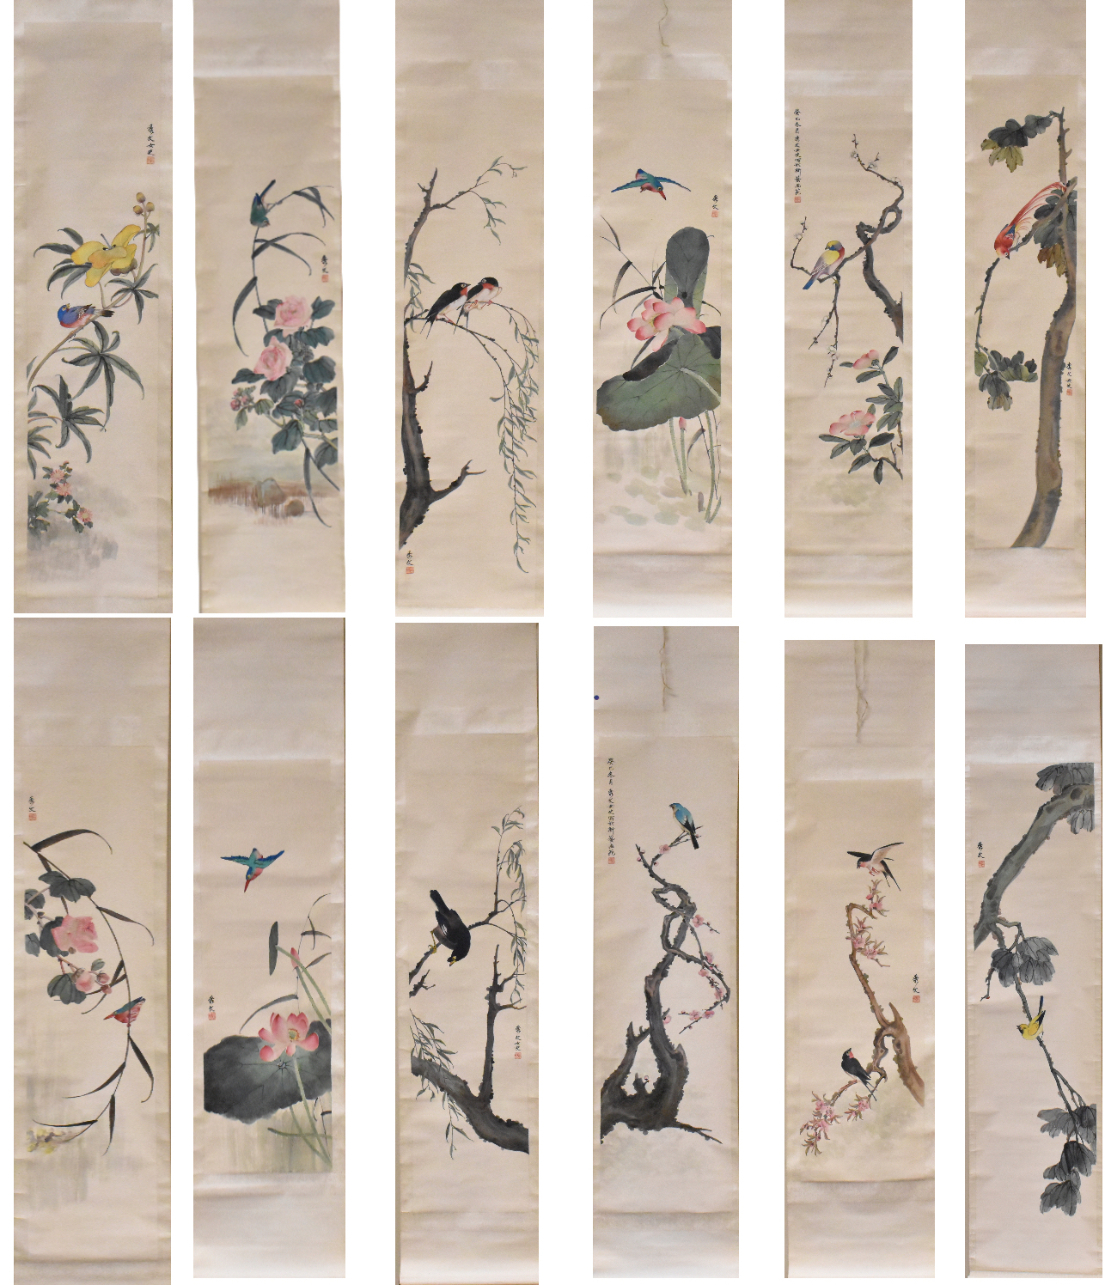 12 CHINESE SCROLL PAINTING OF BIRDS BY 33a13d